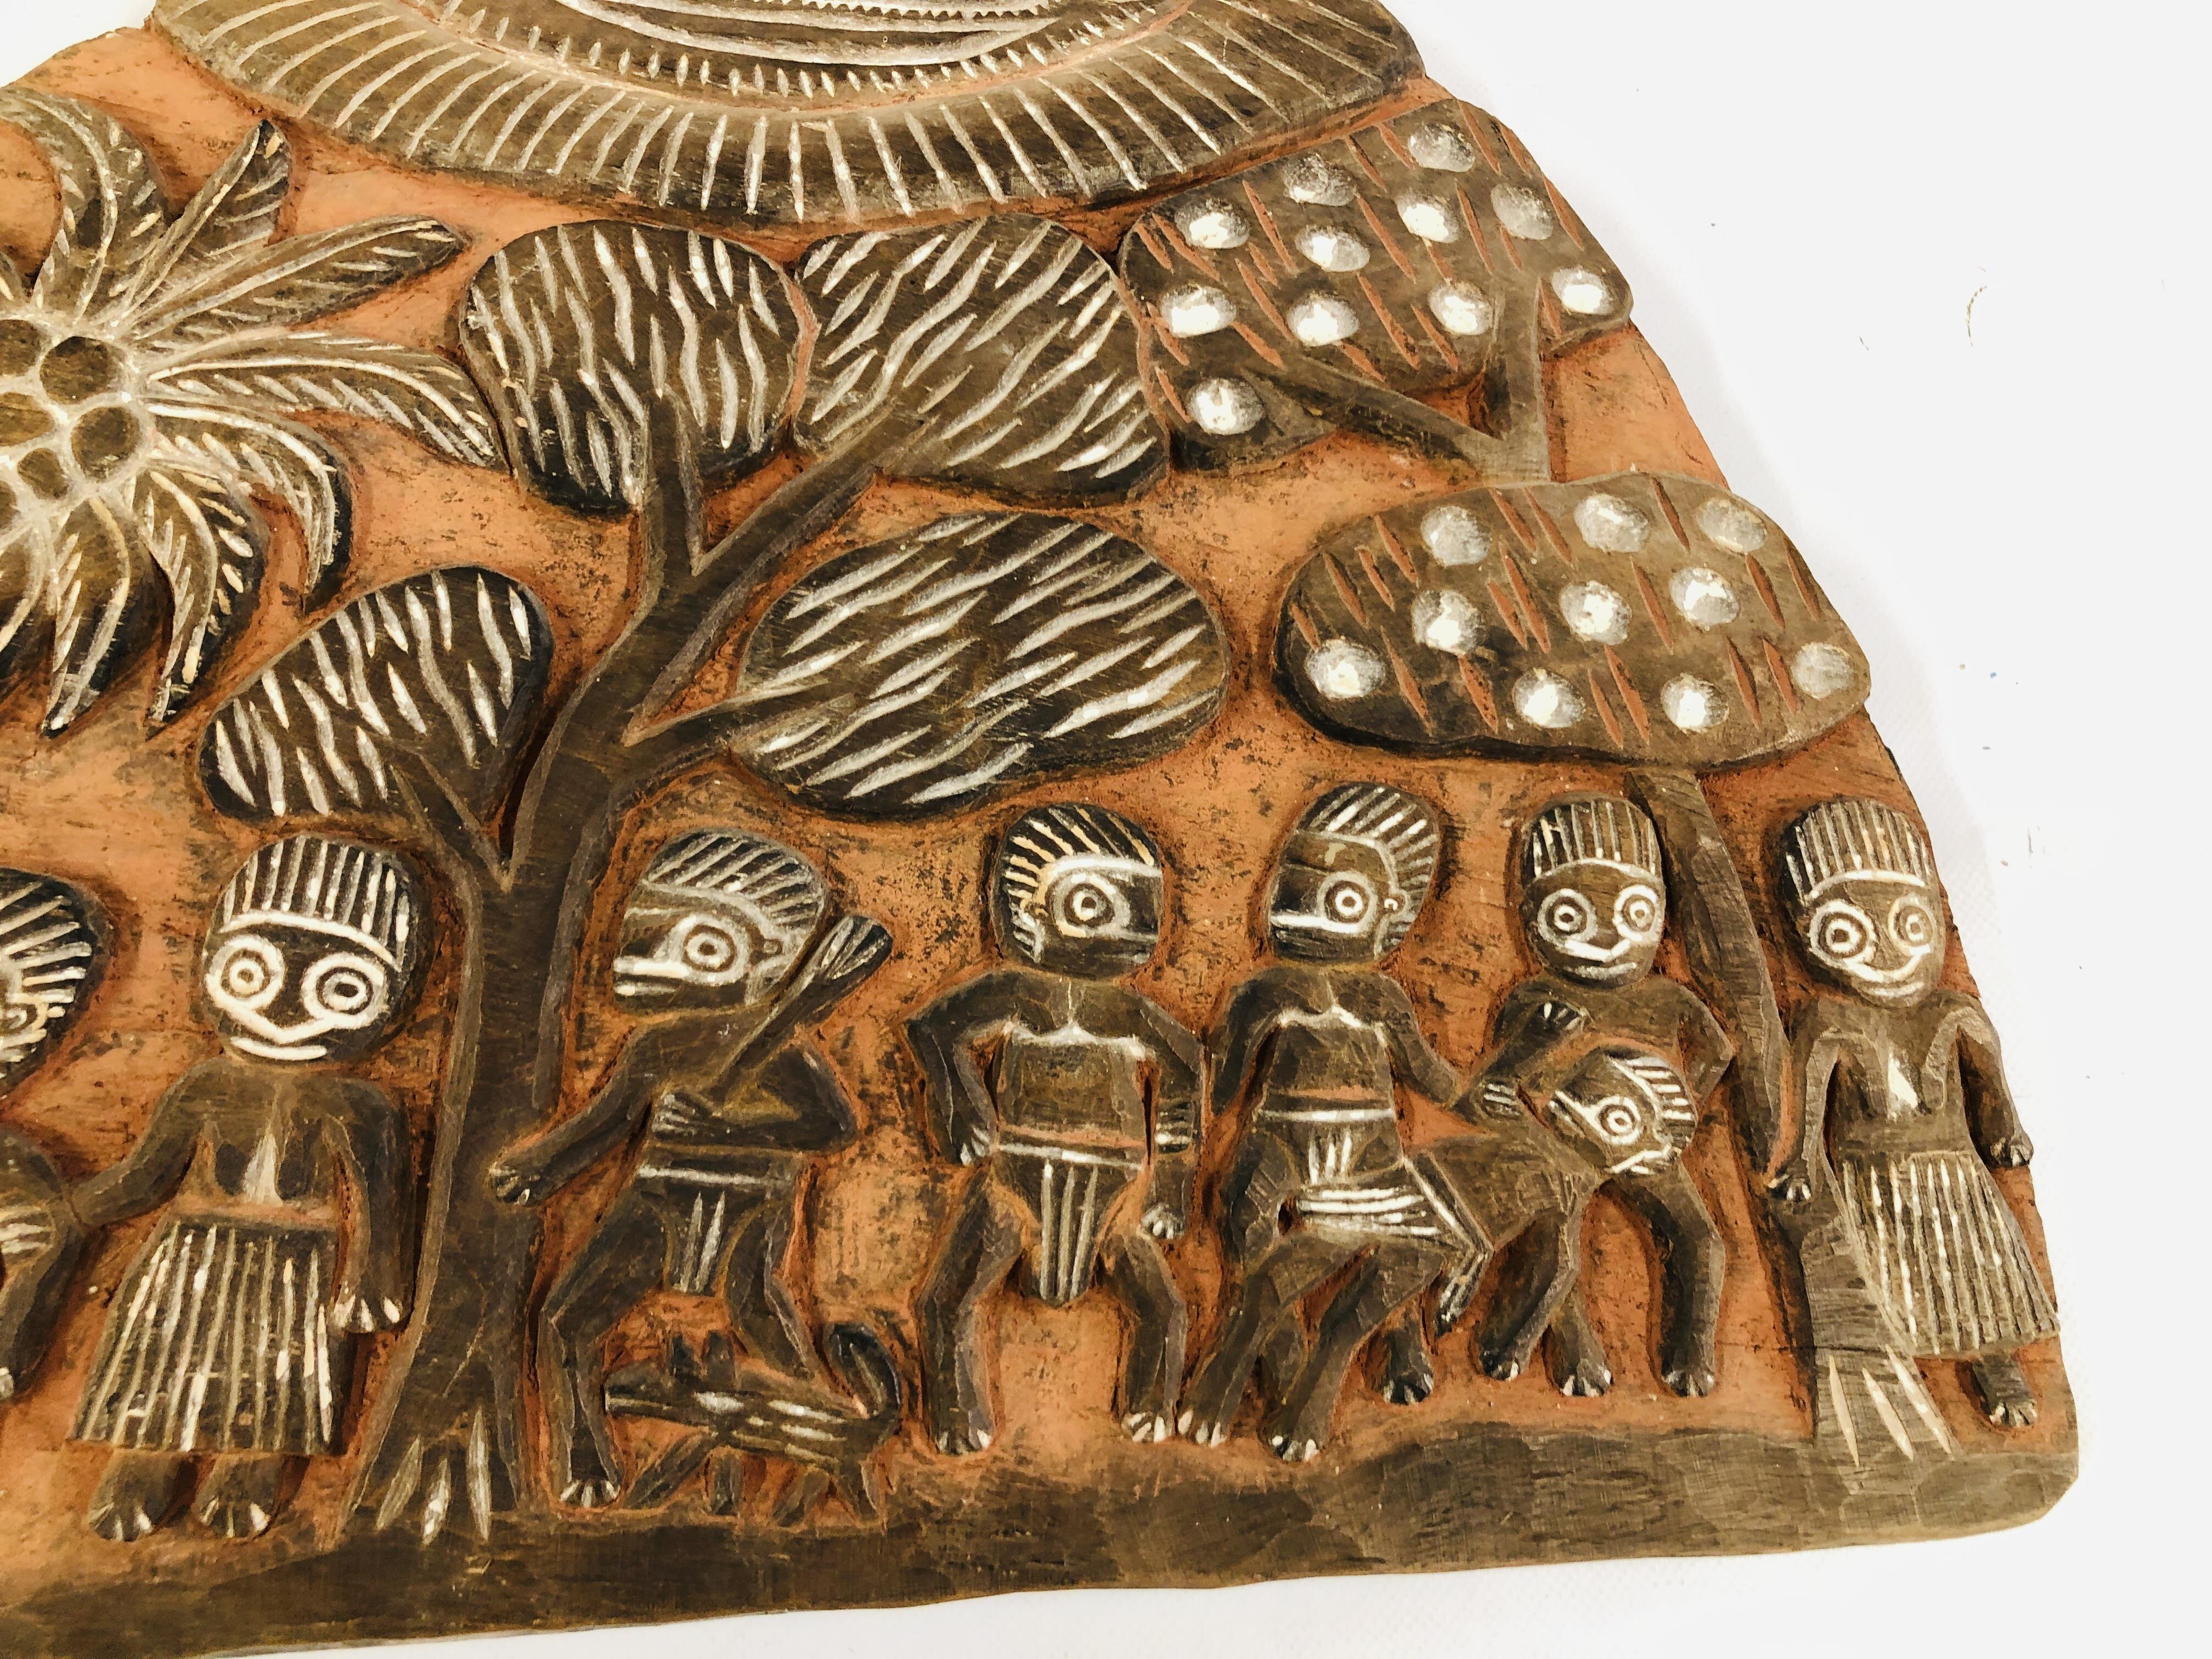 A HARDWOOD CARVED STORY TRIBAL BOARD - Image 3 of 6